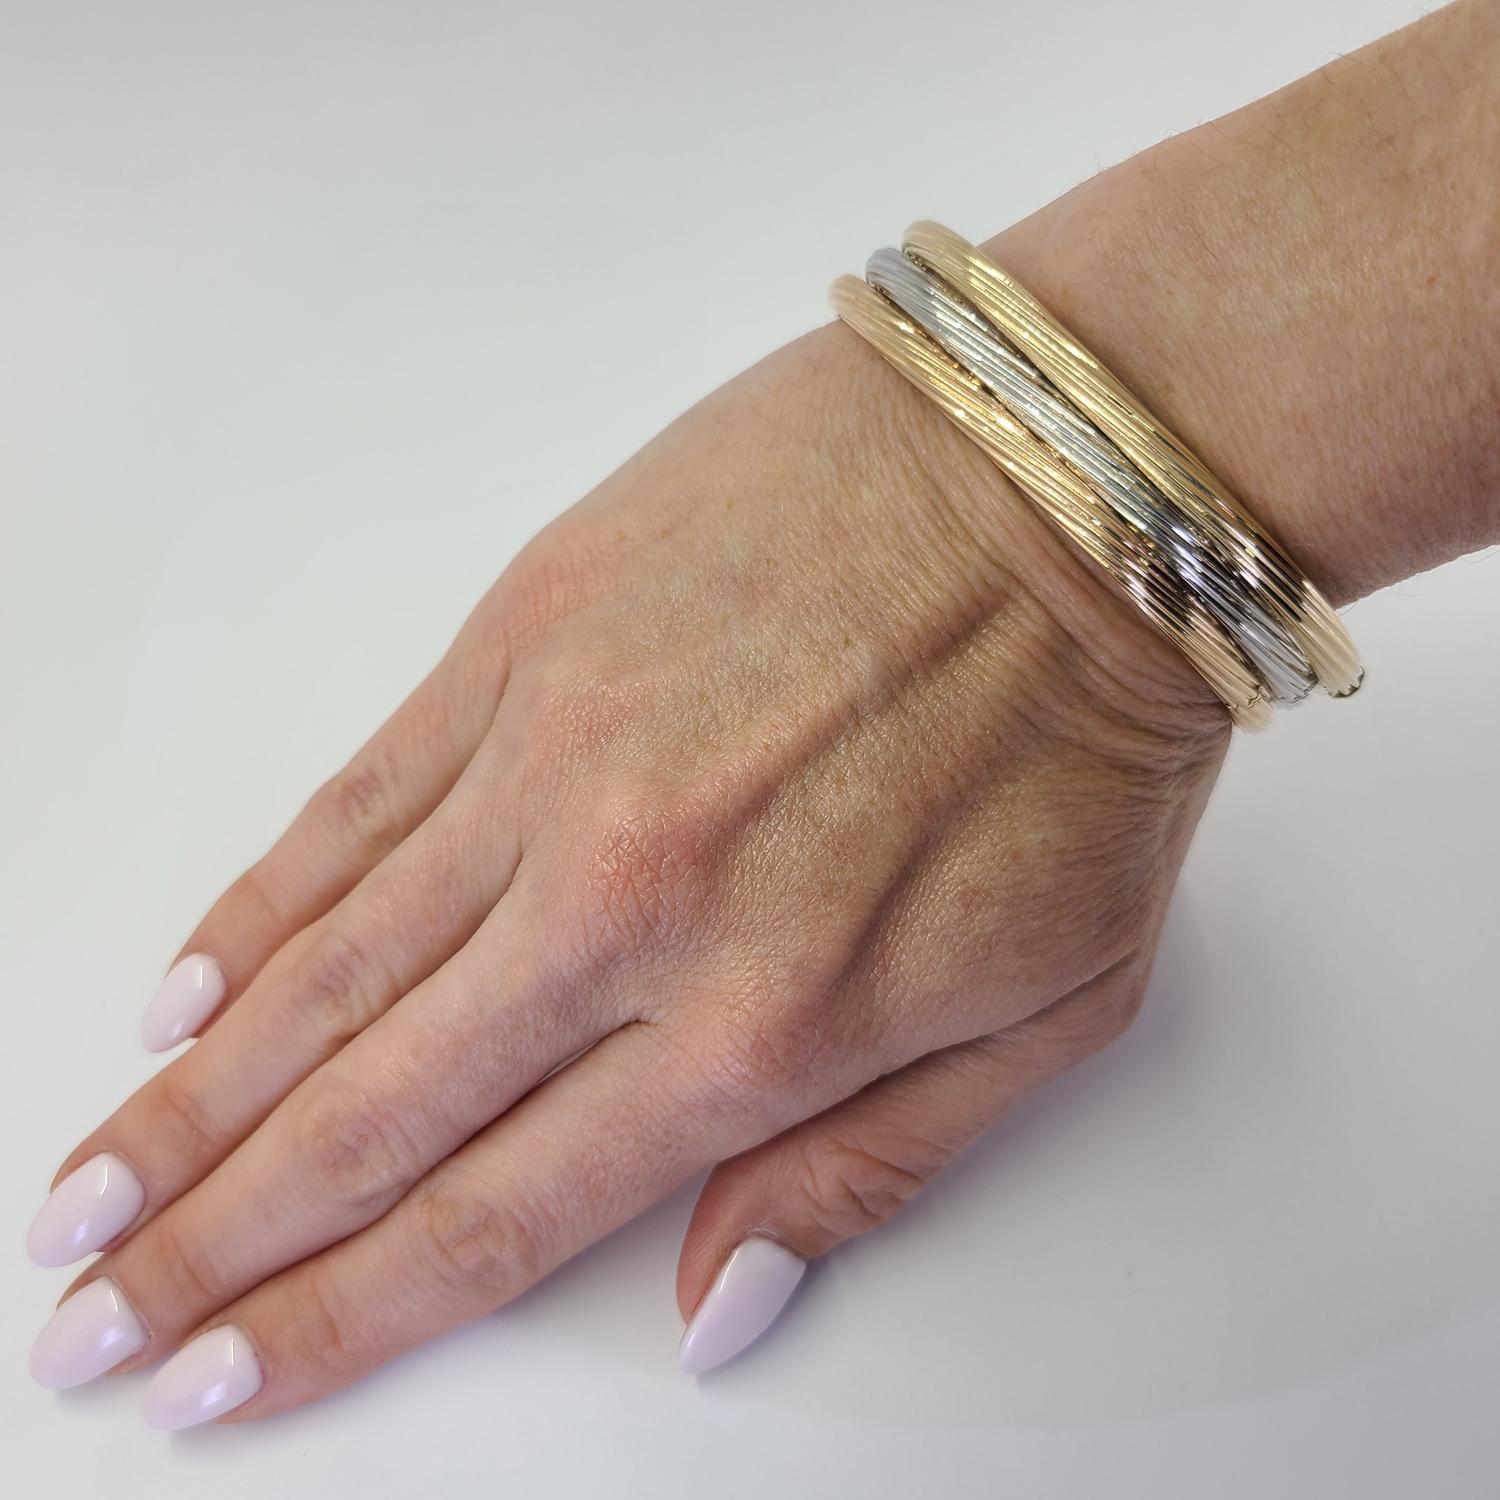 18 Karat Yellow Gold Bangle Featuring A Square Hinged Design with Twist Accent. Hidden Clasp. Finished Weight Is 15.0 Grams.

Matching rose and white gold bangles also available separately.